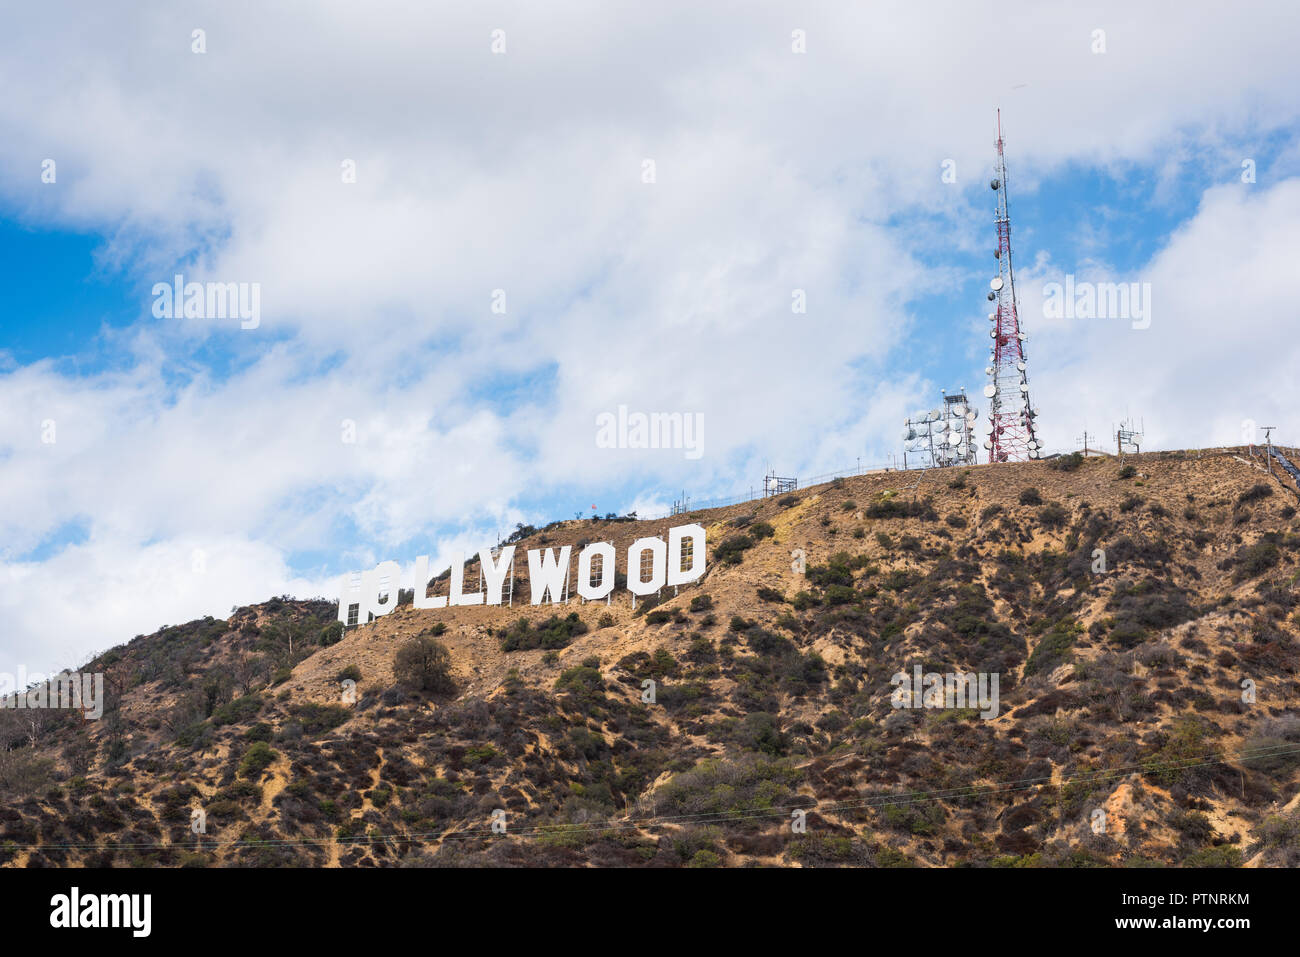 Los Angeles, CA, USA - October 28, 2016: Close up of Hollywood sign on a cloudy day Stock Photo